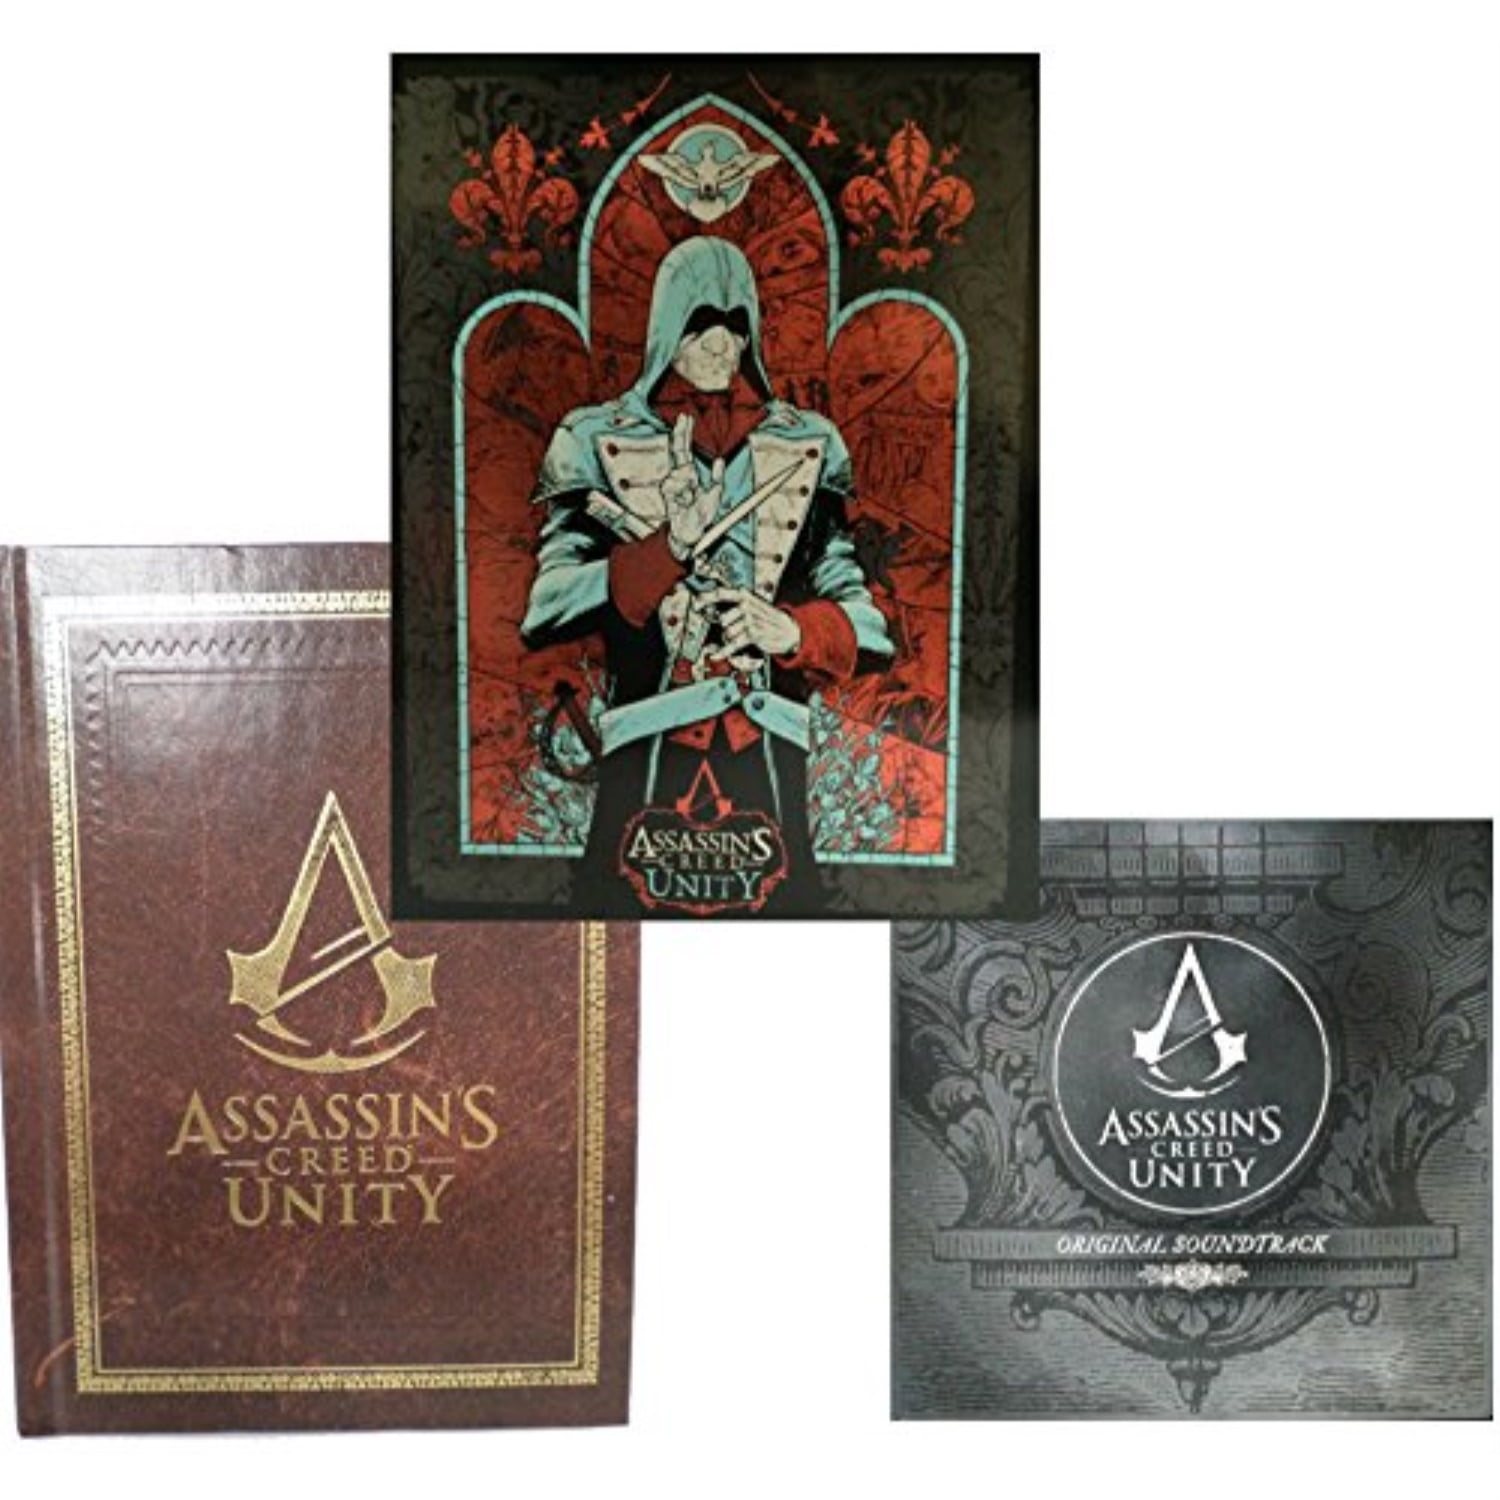 assassin's creed: unity (exclusive limited edition steelbook case), art book and original soundtrack cd